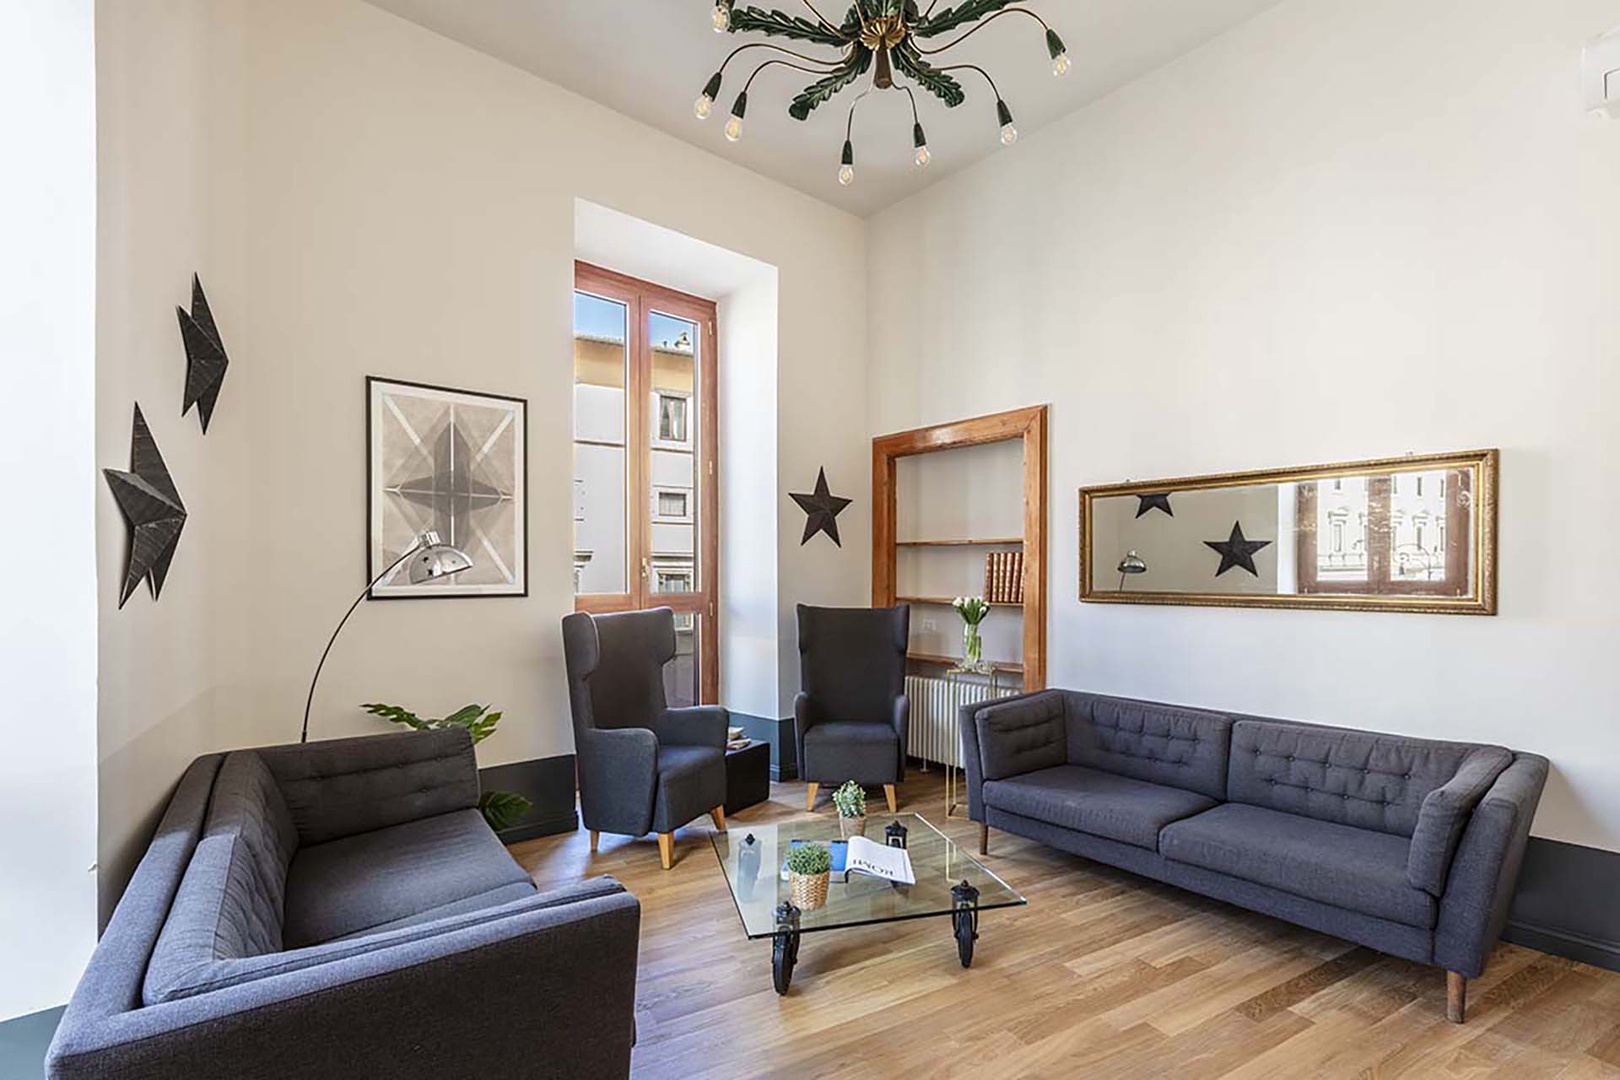 Welcome to the light filled Tartini Harmony apartment.